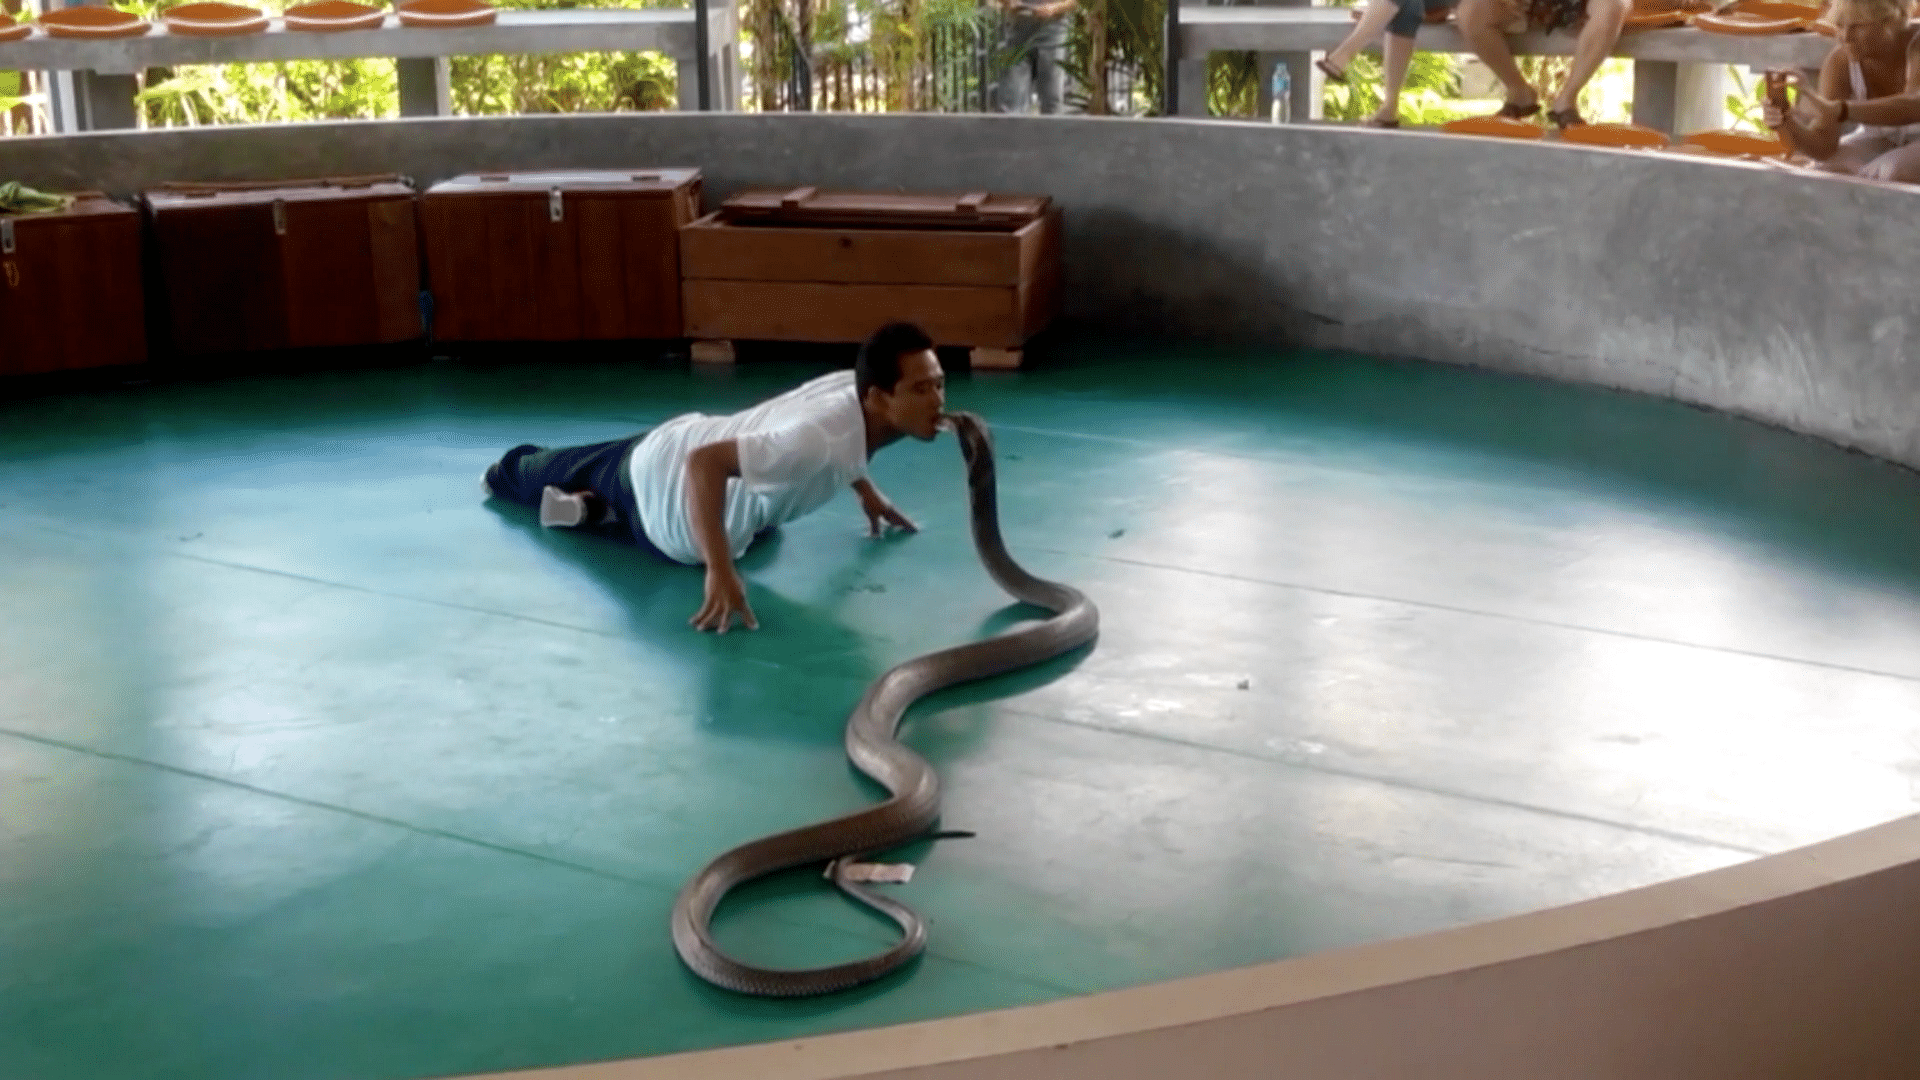 In a Bizarre show,the snake charmer kisses the cobra on the mouth before pulling it into the crowd. (Photo: AP/CatersNews Screengrab)